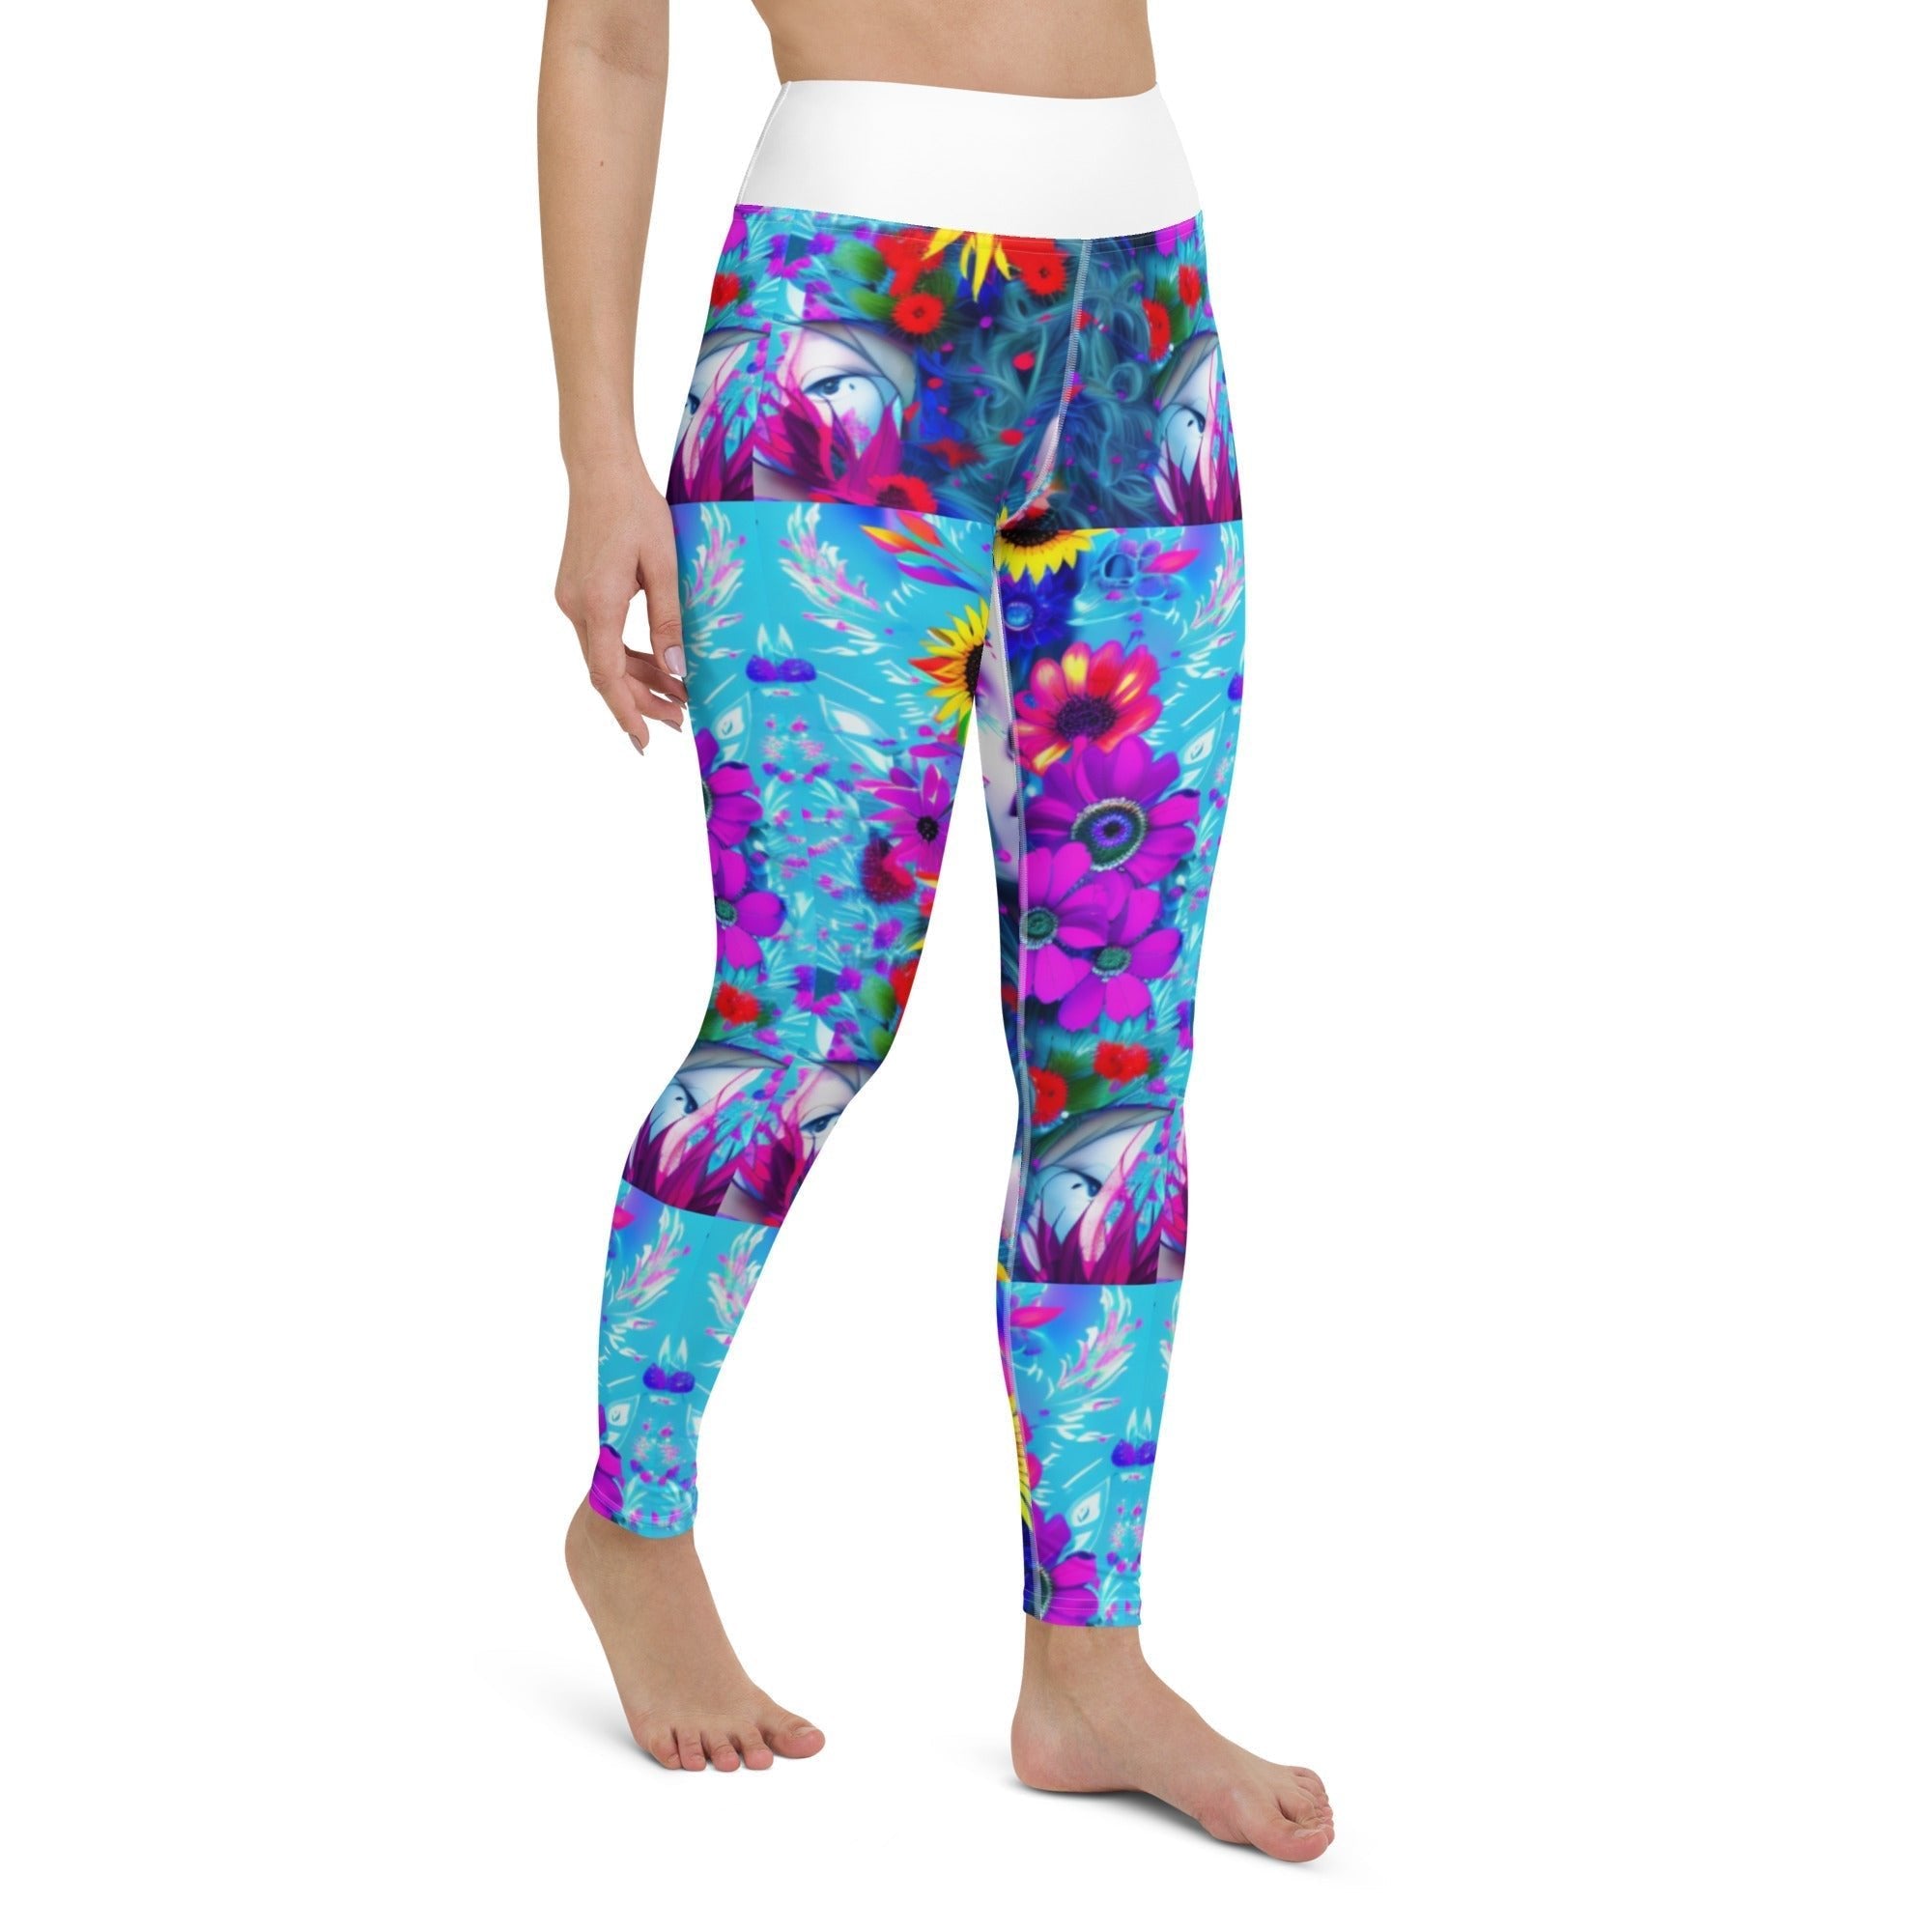 Enchanting Yoga Leggings - Indulge in the Magic of Comfort and Elegance - Experience a World of Romance for Your Legs - Guy Christopher